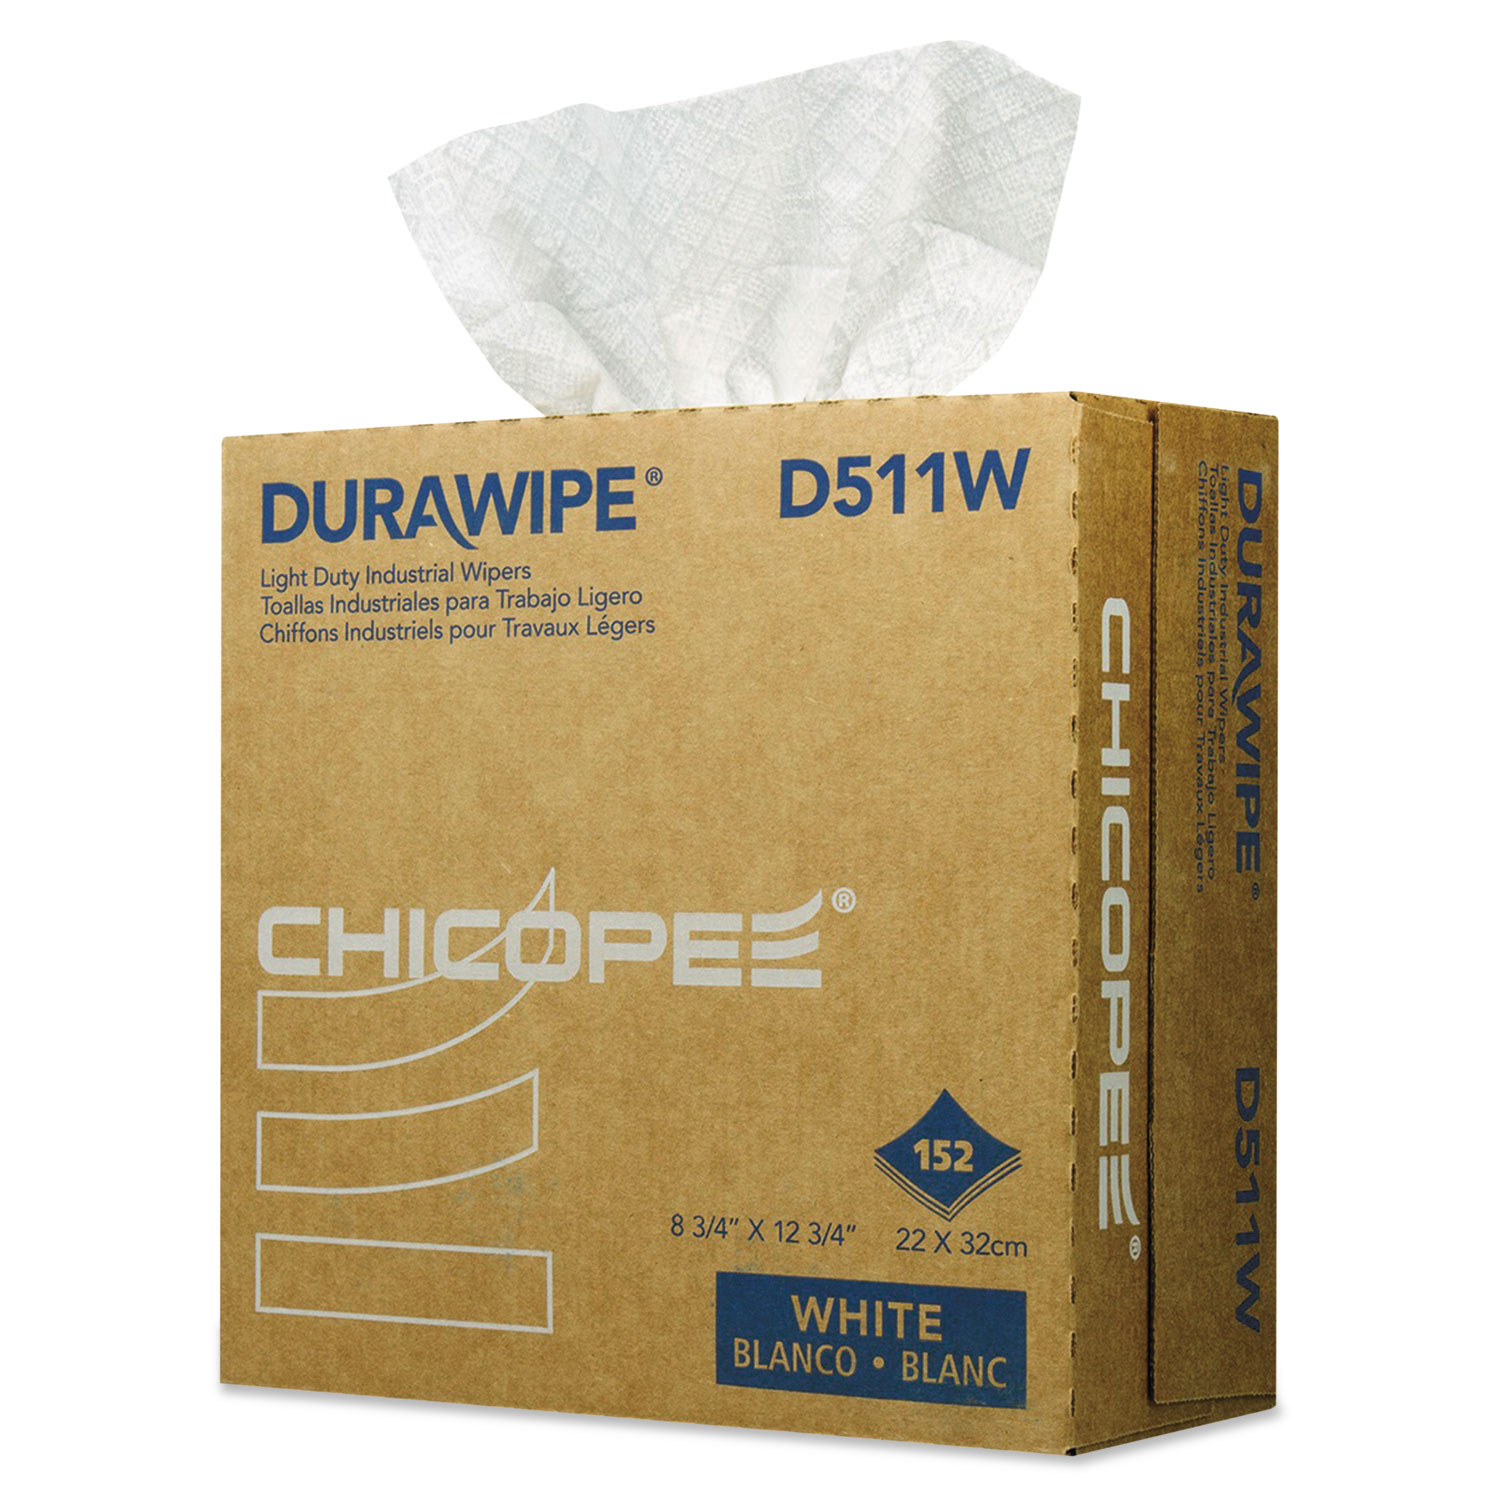  Chicopee D511W Durawipe Light Duty Industrial Wipers, 8.8 x 12.8, White, 152/Box, 12 Box/CT (CHID511W) 